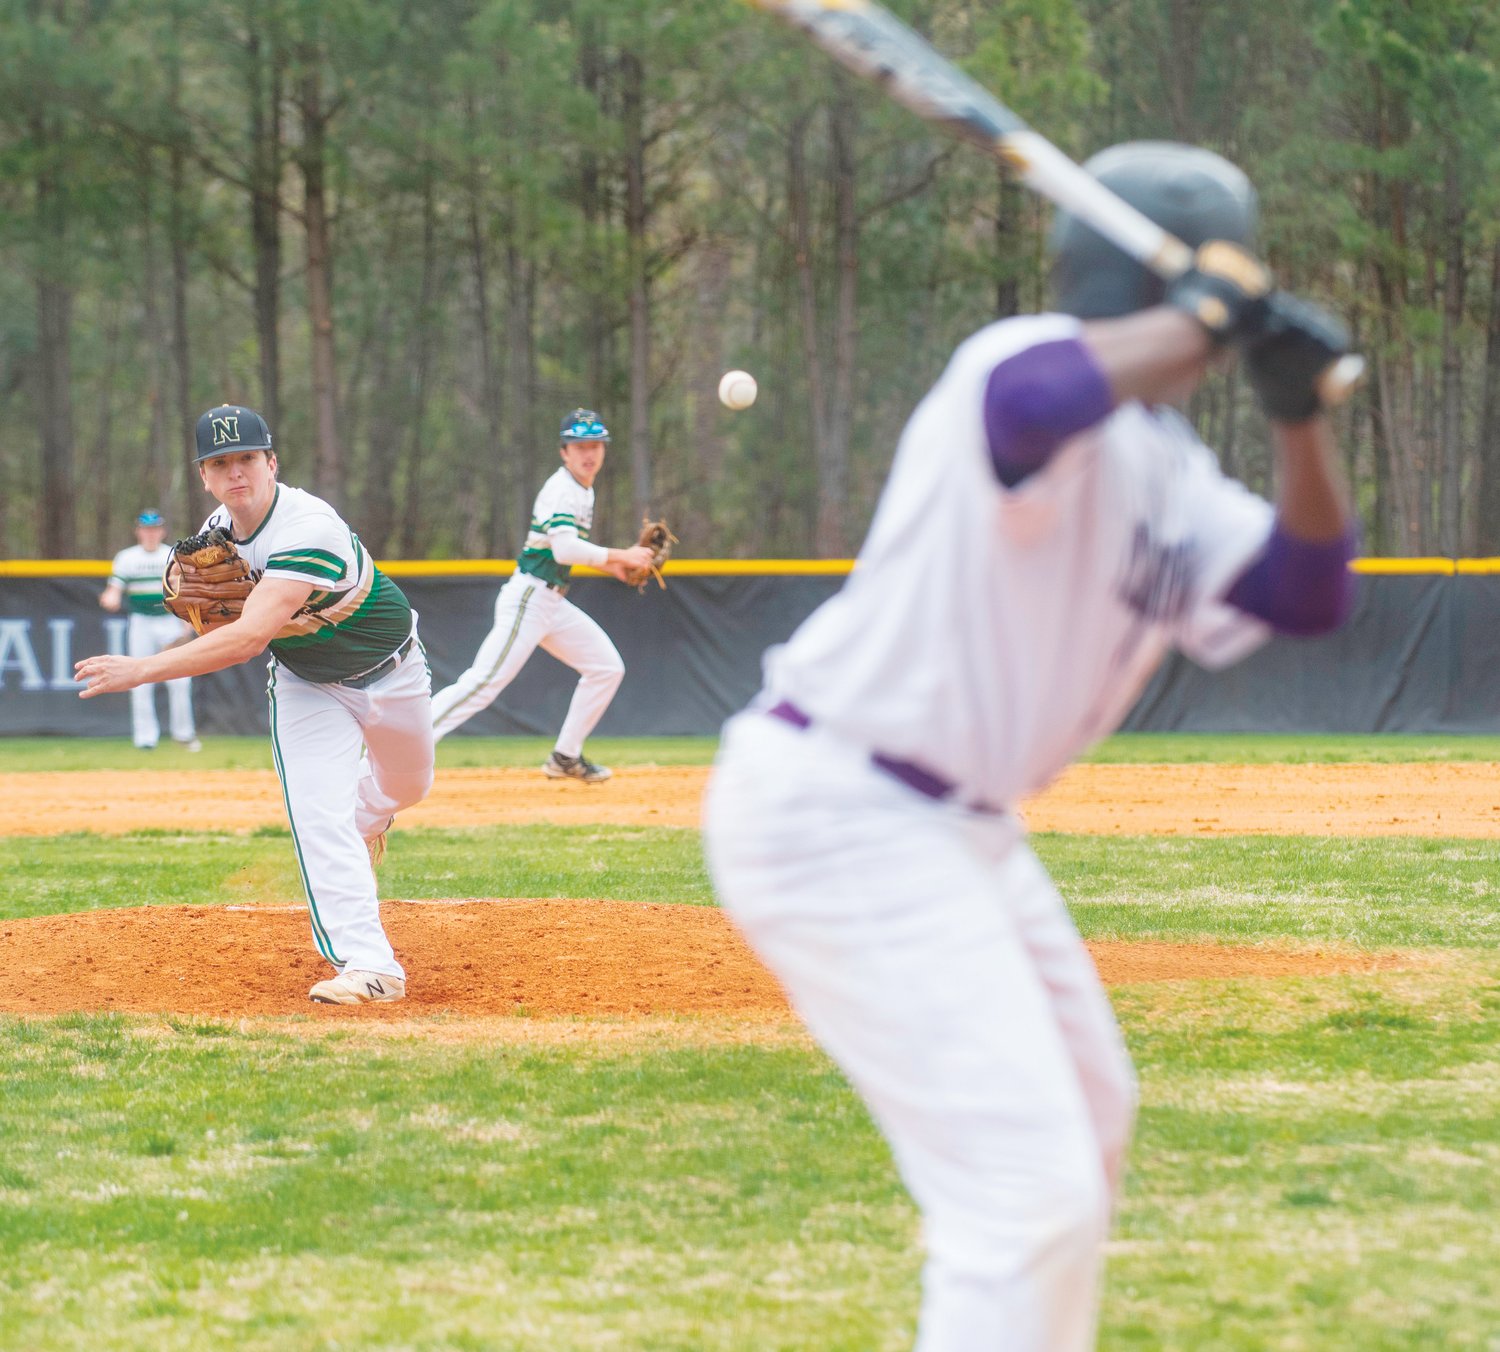 Northwood junior Nathan McWilliams (left) throws a pitch to Carrboro sophomore Aric Stewart in the Chargers' 7-3 win over the Jaguars last Saturday. McWilliams threw five innings, allowing six hits and just one earned run in his first start of the season.